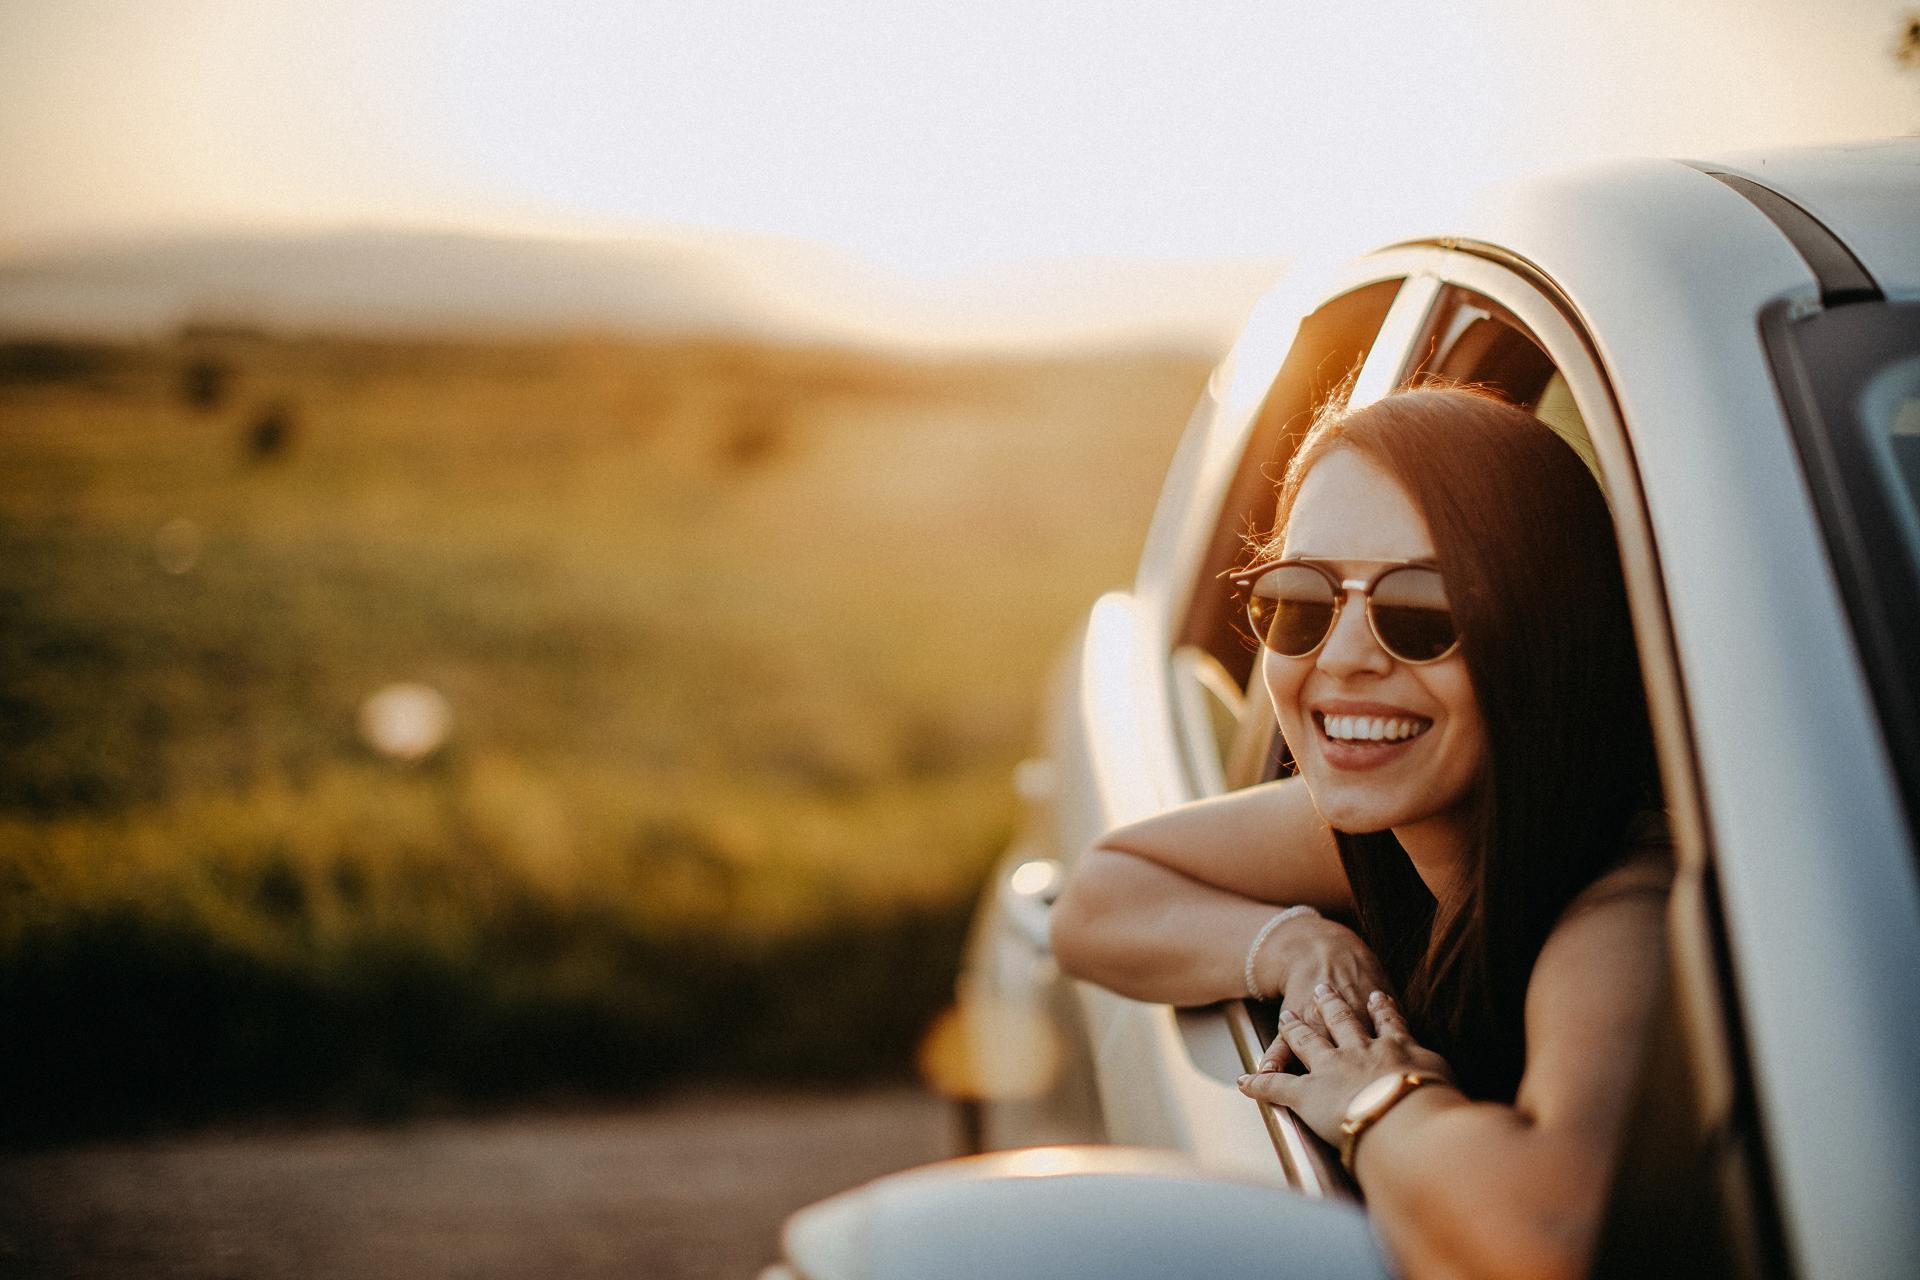 A smiling woman in her car.